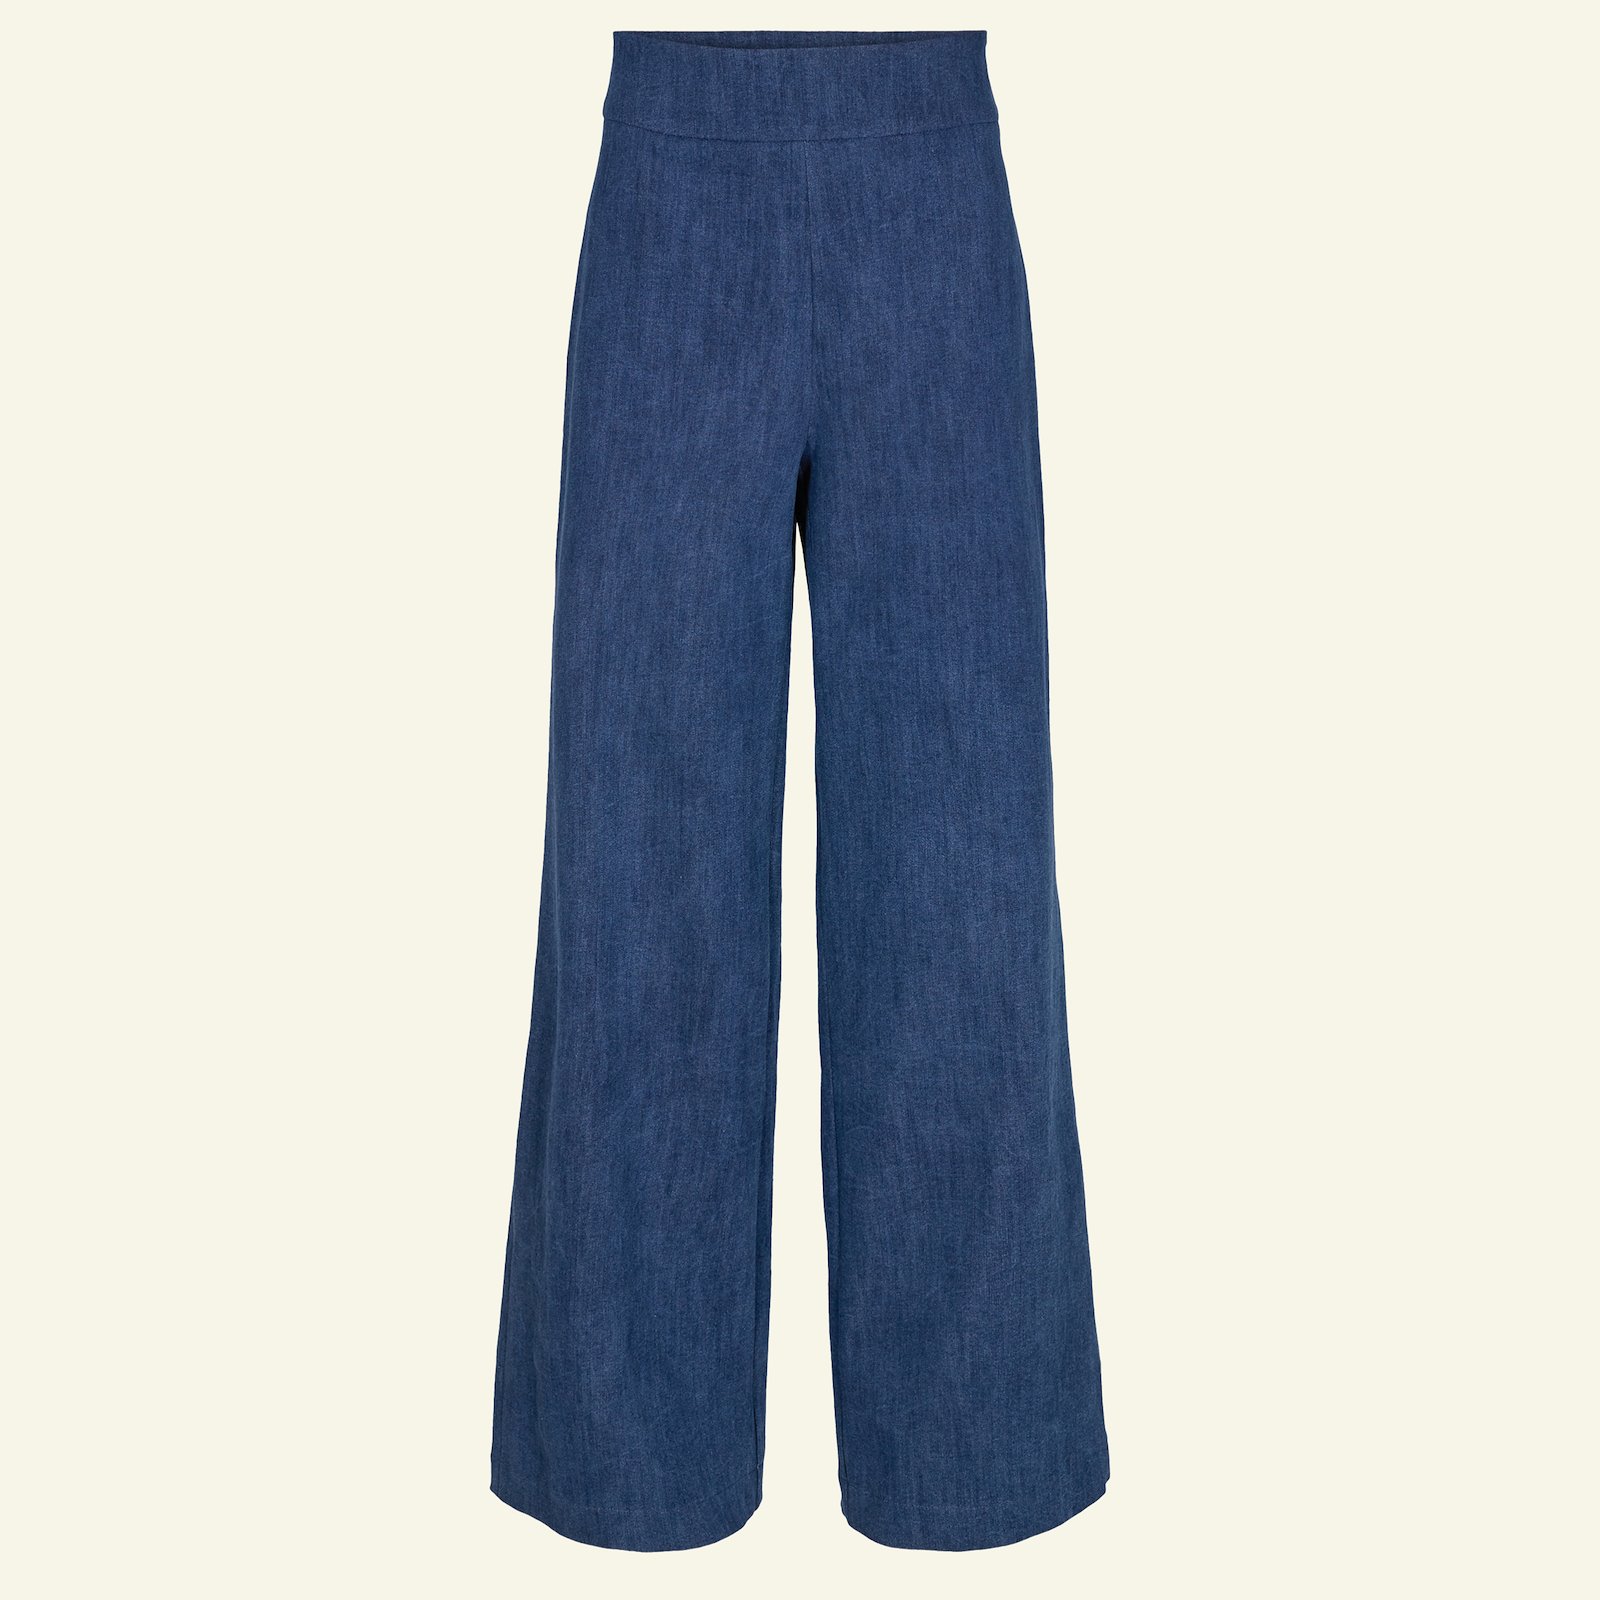 Highwaist and wide legs trousers, 44/16 p20052_460851_sskit